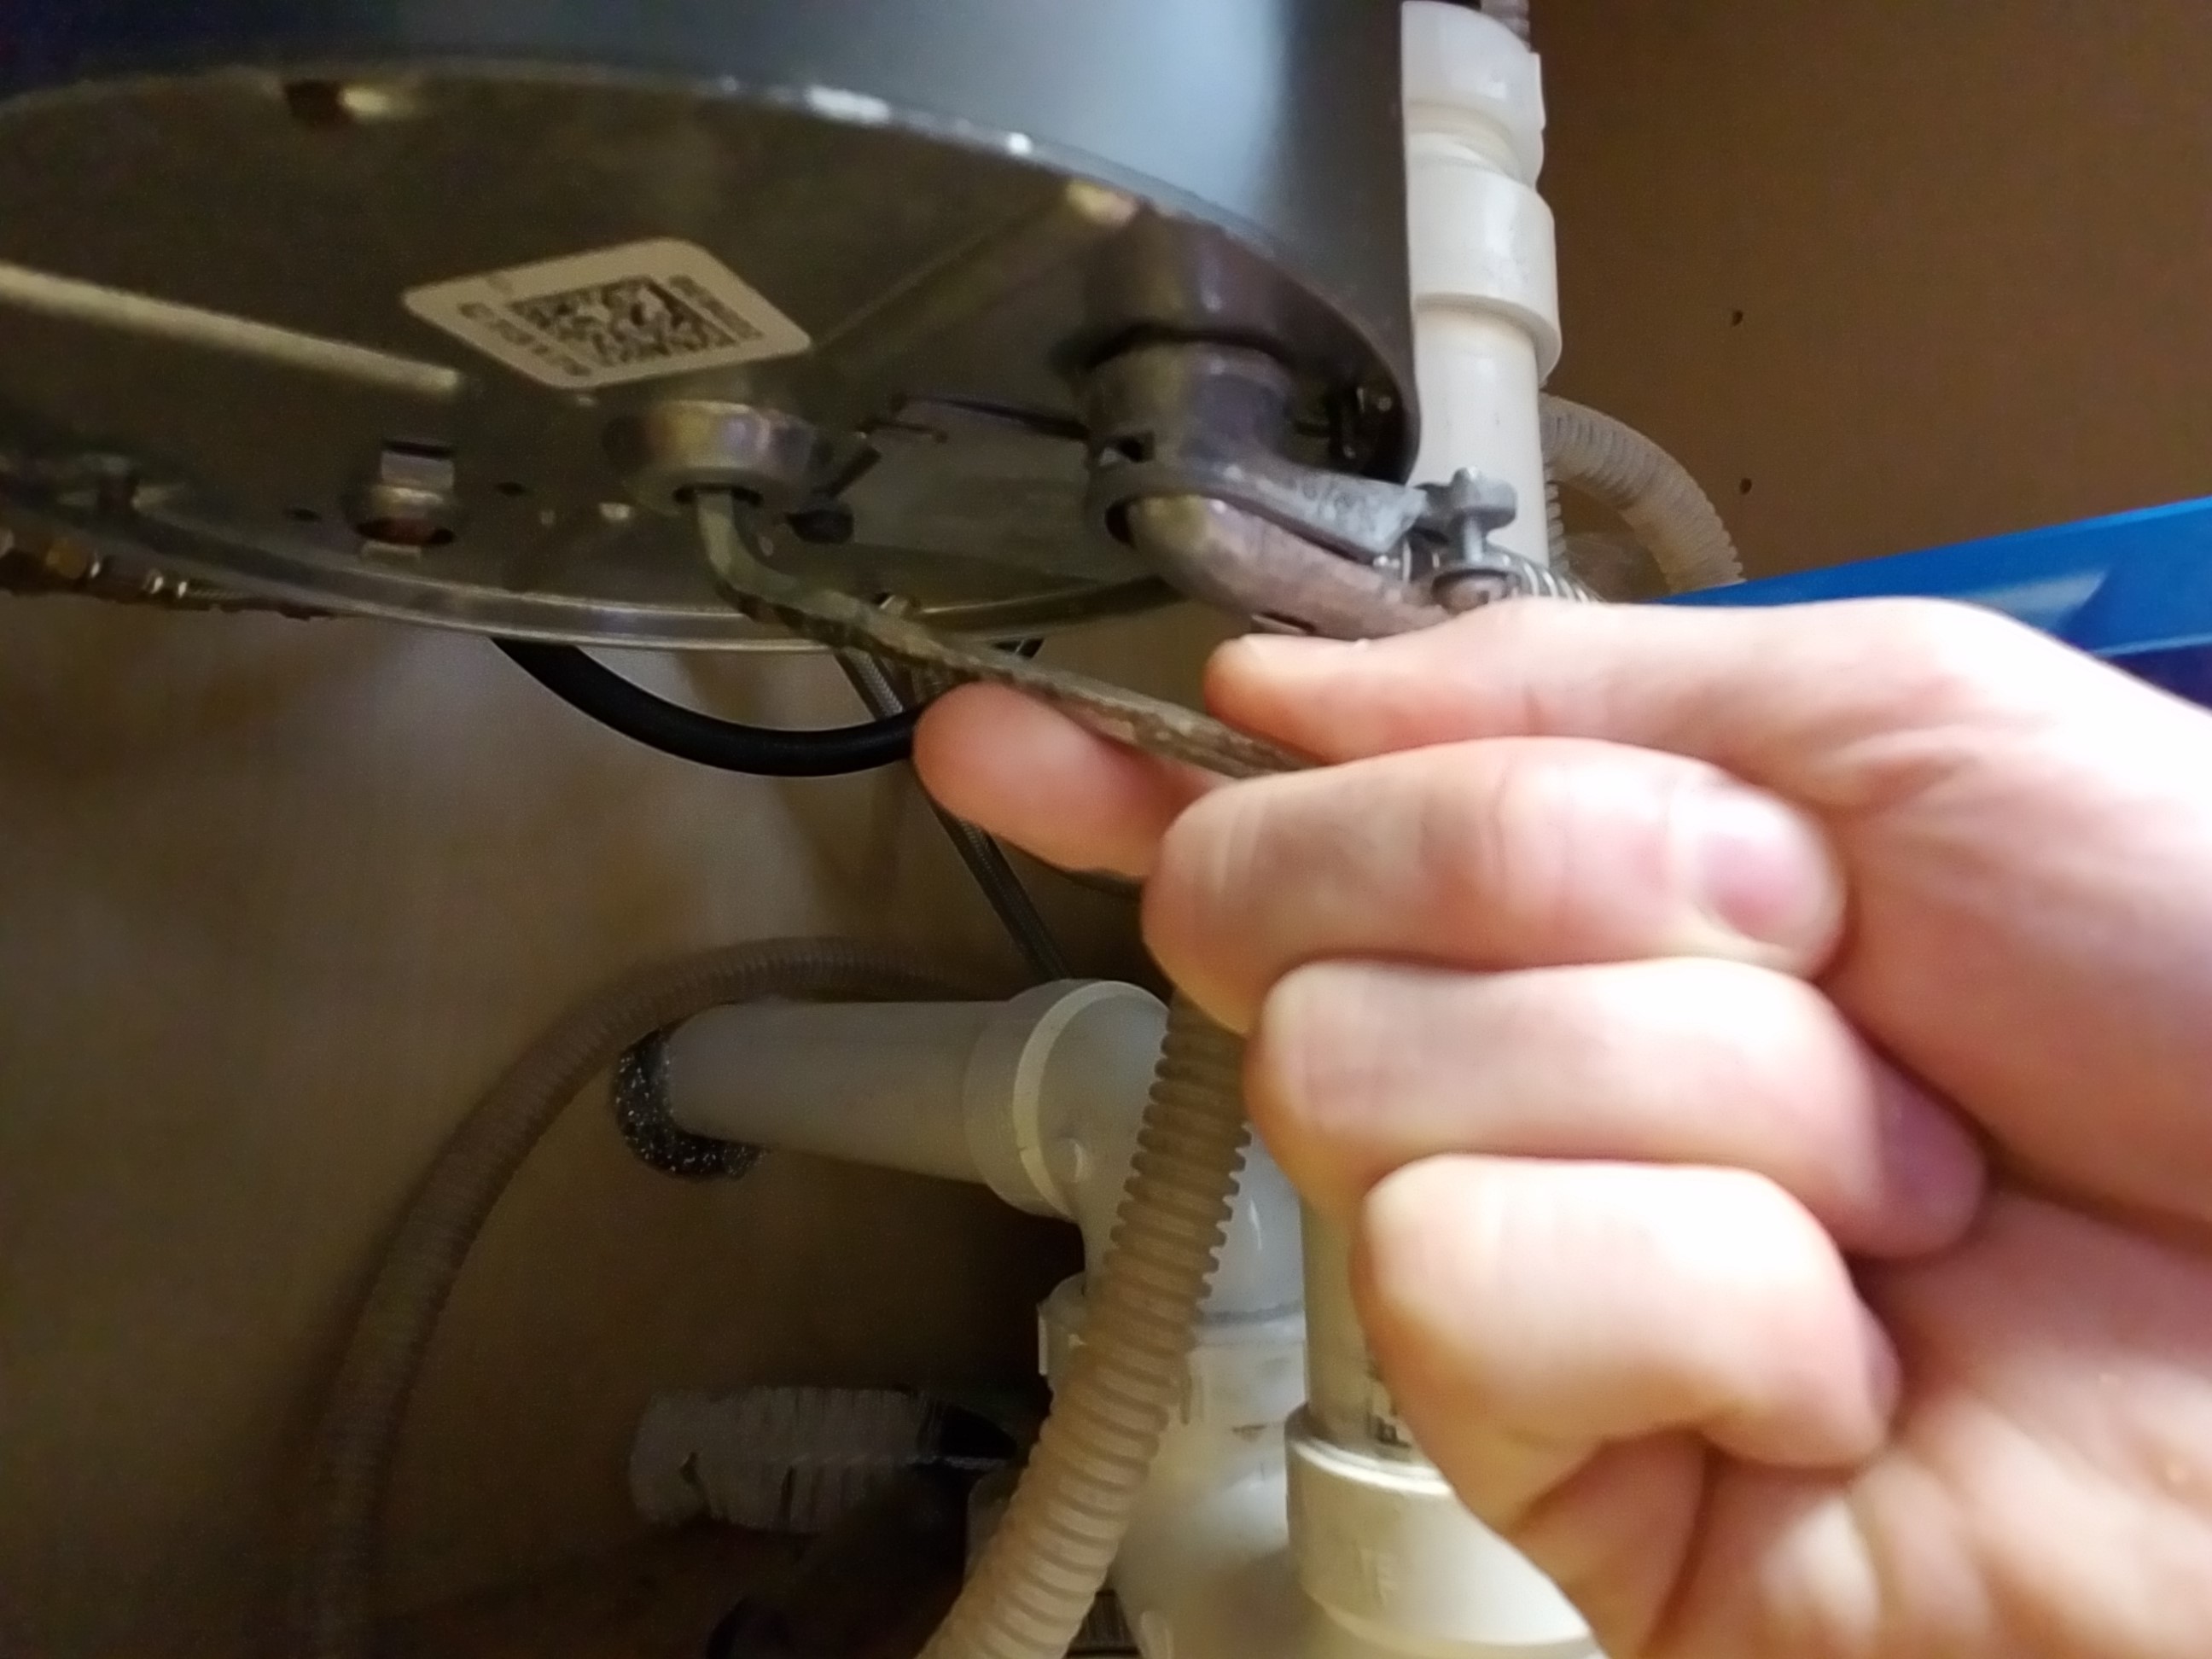 How to Fix a Garbage Disposal - MassLandlords.net